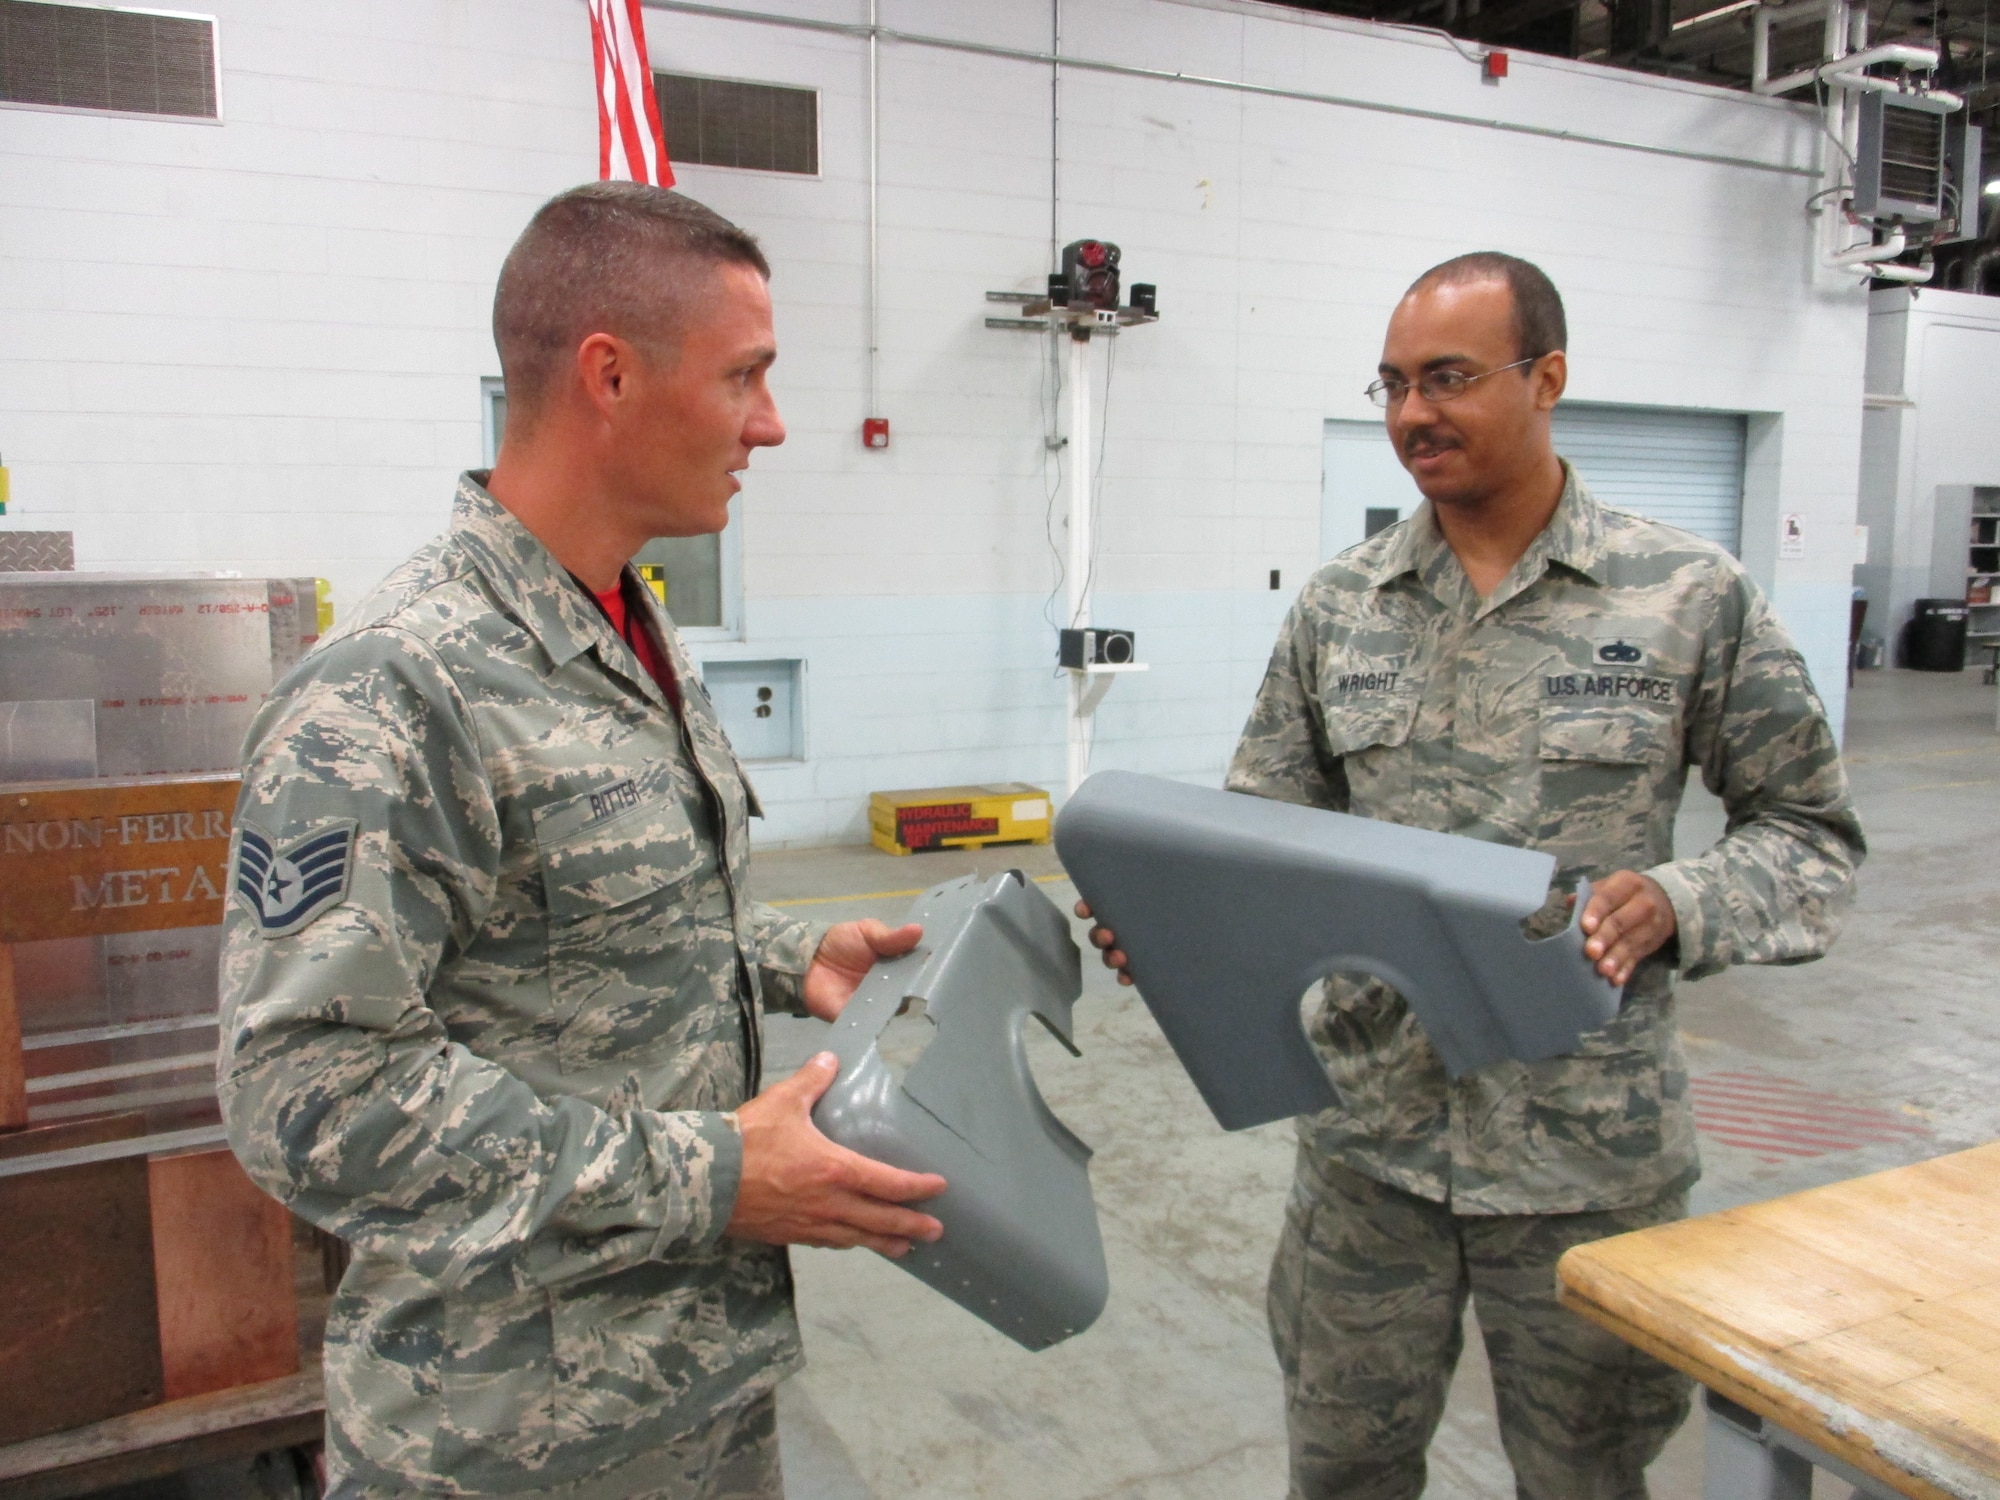 Staff Sgt. Christopher Ritter, 513th Maintenance Squadron Section Chief, and Staff Sgt. Michael Wright, 552nd Maintenance Squadron Aircraft Metals Technology, discuss the differences 3-D printing bring to the AWACS fabrications shop.  The damaged part has a two-year backlog for replacement parts and requires riveted reinforcement, while the printed part has reinforcements belt in  and can be printed in a single day. (U.S. Air Force photo by Master Sgt. Andrew Stephens)